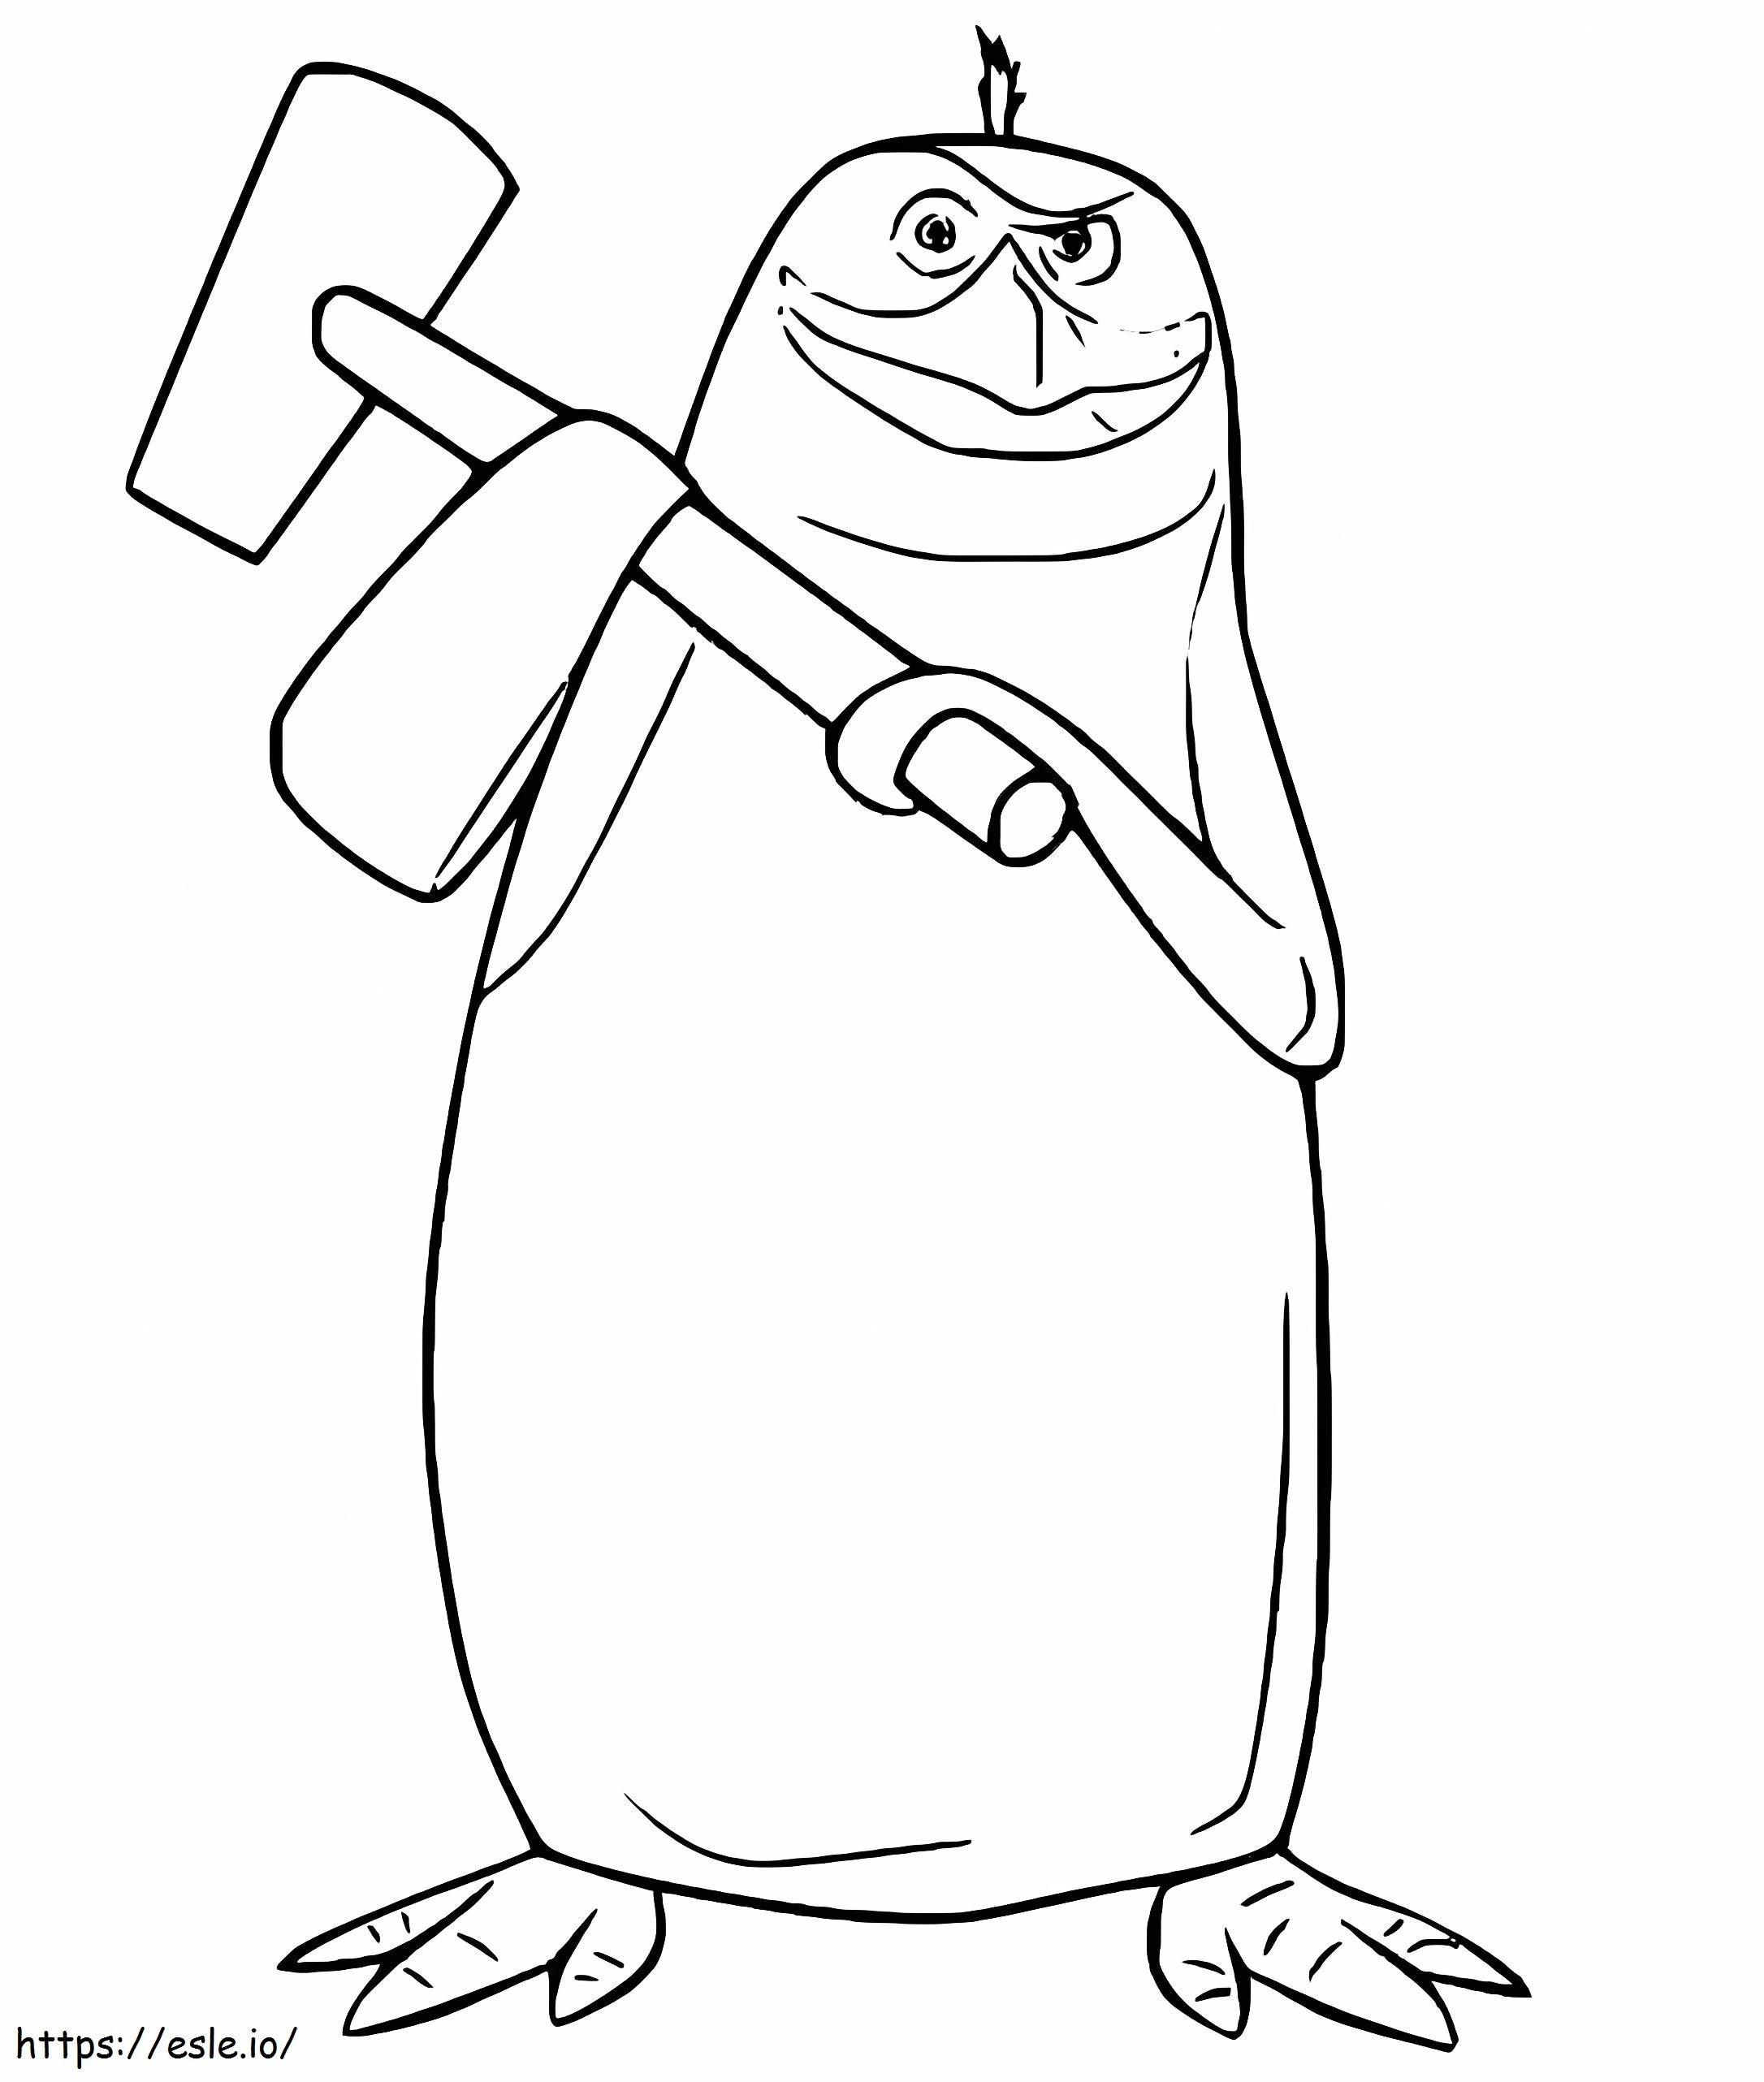 Rico From Penguins Of Madagascar coloring page